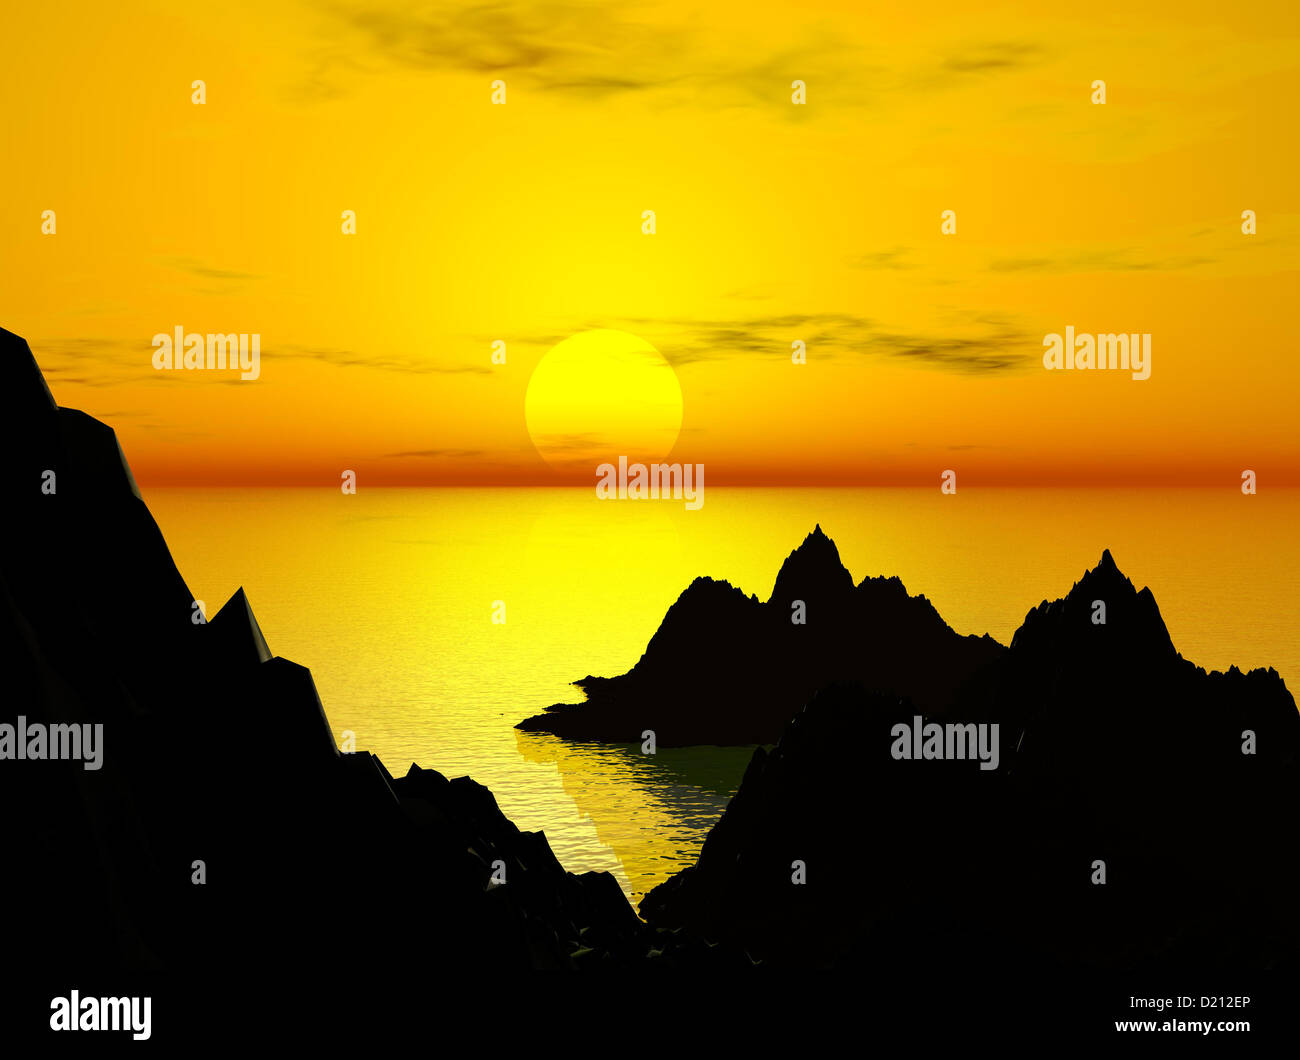 Computer Generated Image of a Tropical Island at Sunset Stock Photo